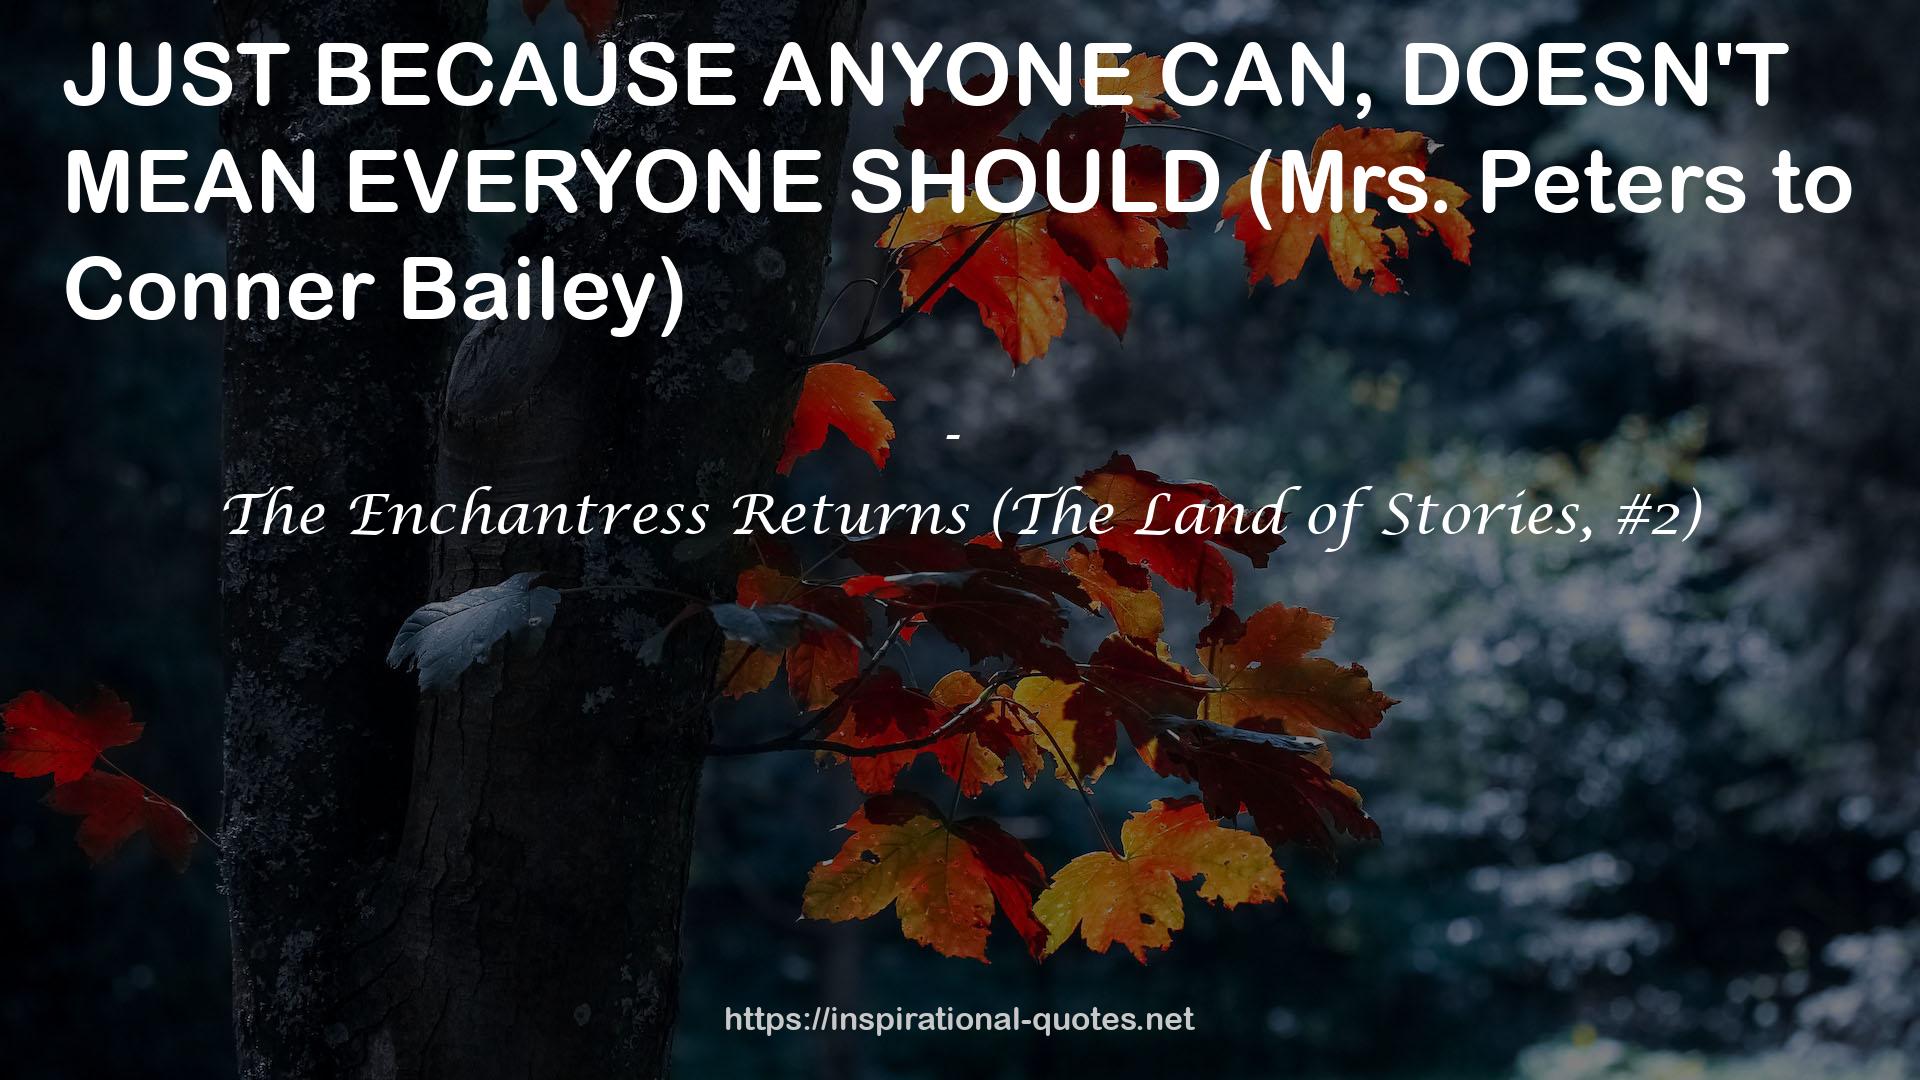 The Enchantress Returns (The Land of Stories, #2) QUOTES